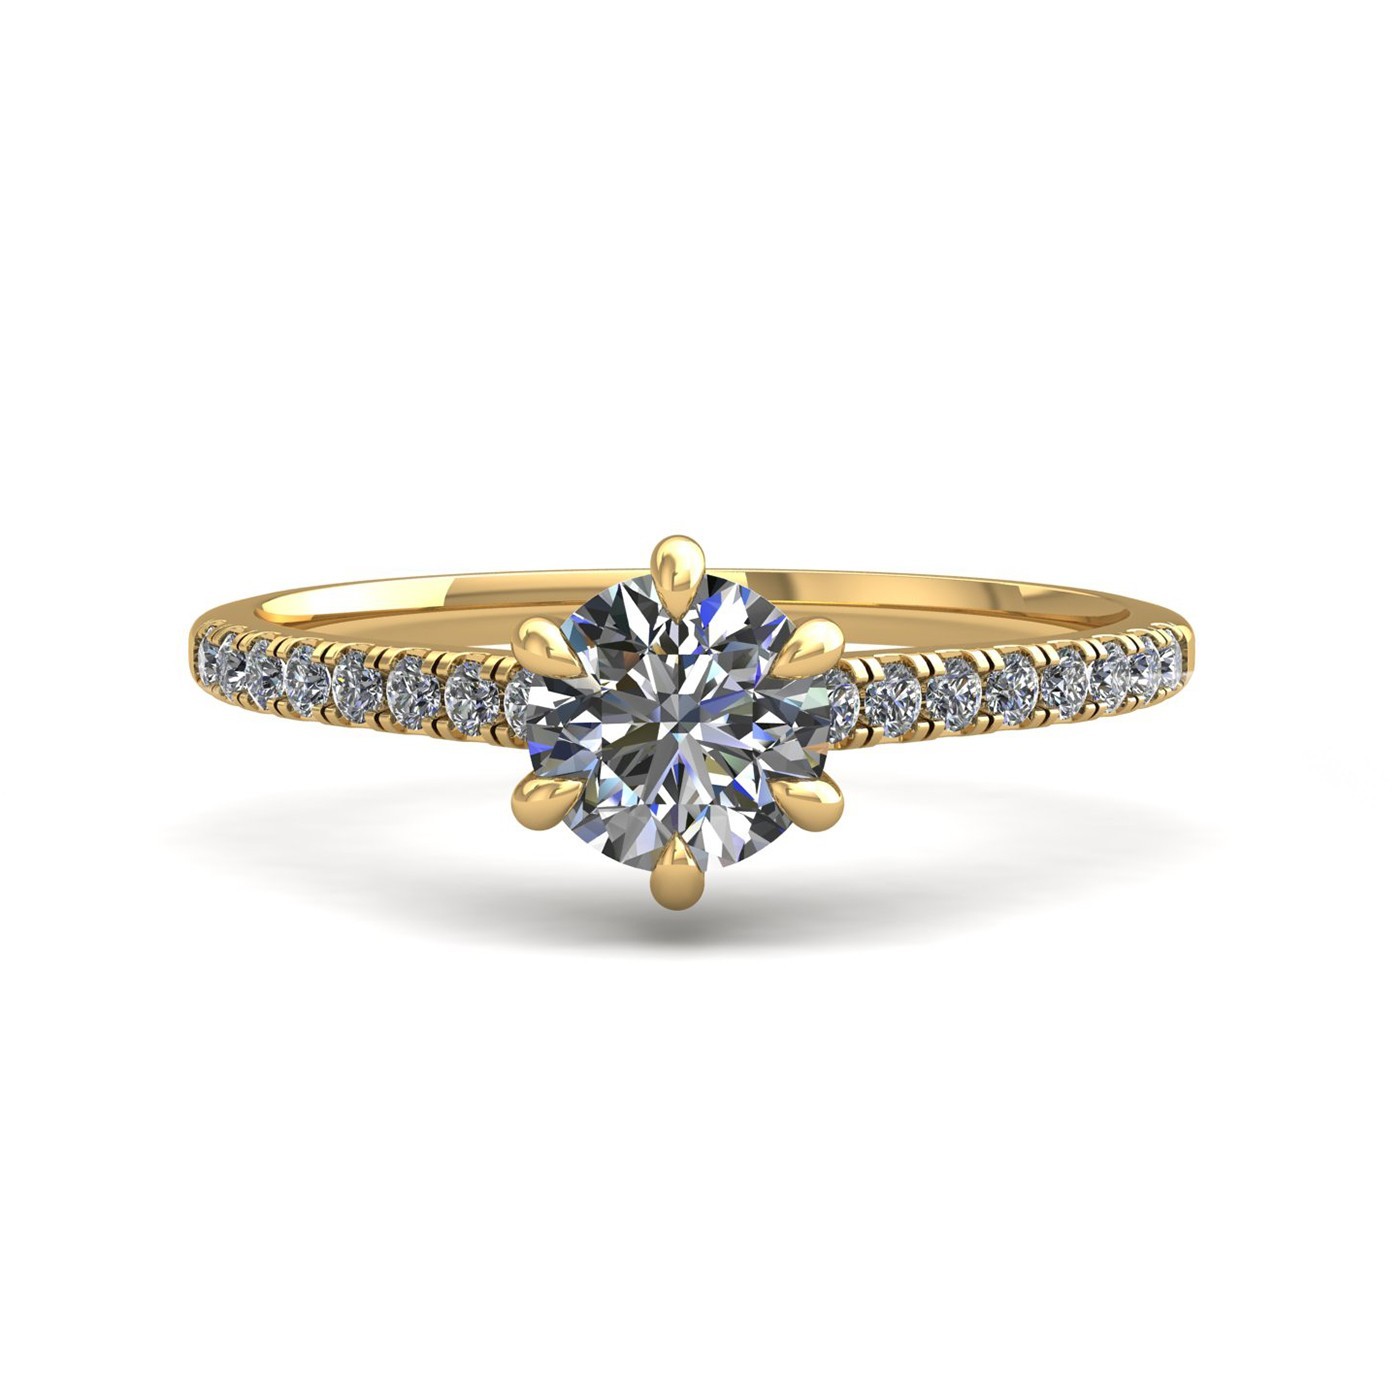 18k yellow gold 0,50 ct 6 prongs round cut diamond engagement ring with whisper thin pavÉ set band